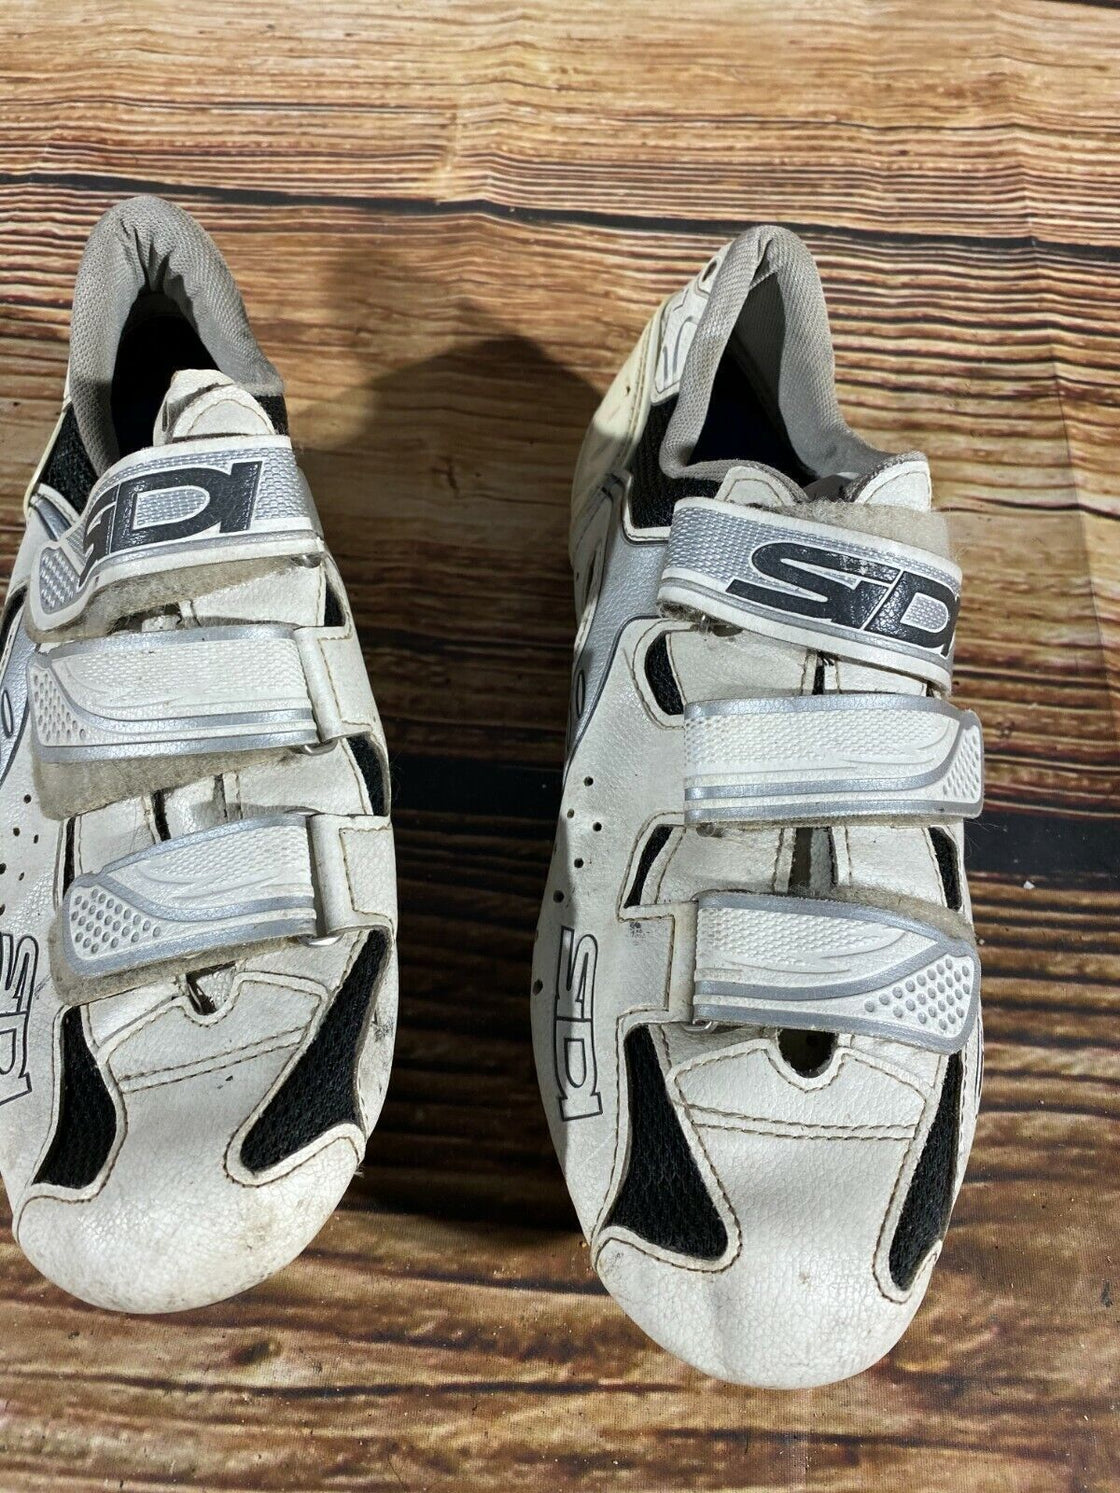 SIDI Road Cycling Shoes Clipless Biking Boots Size EU 43 with Cleats